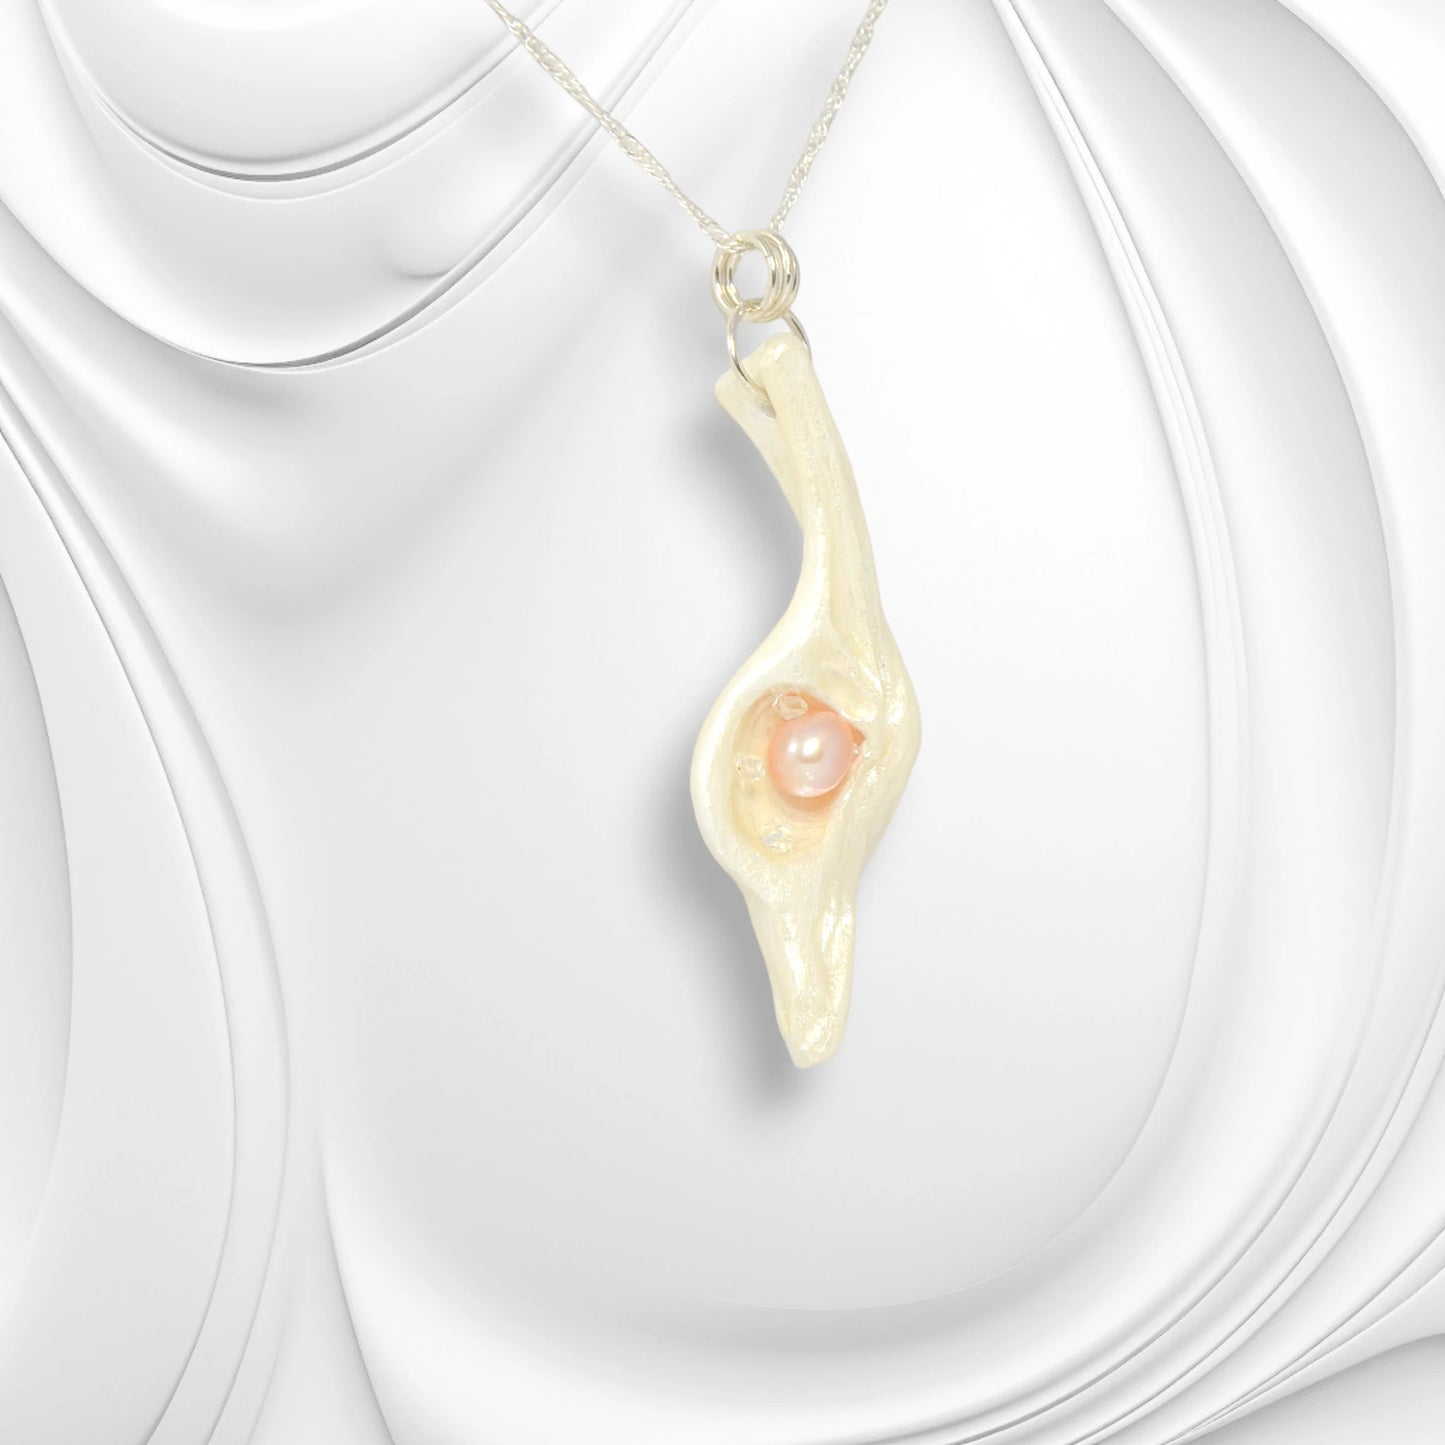 The pendant Champagne on Ice is shown on a wavy white background.  The pendant is turned slightly to the right to show the unique shape of the pendant.